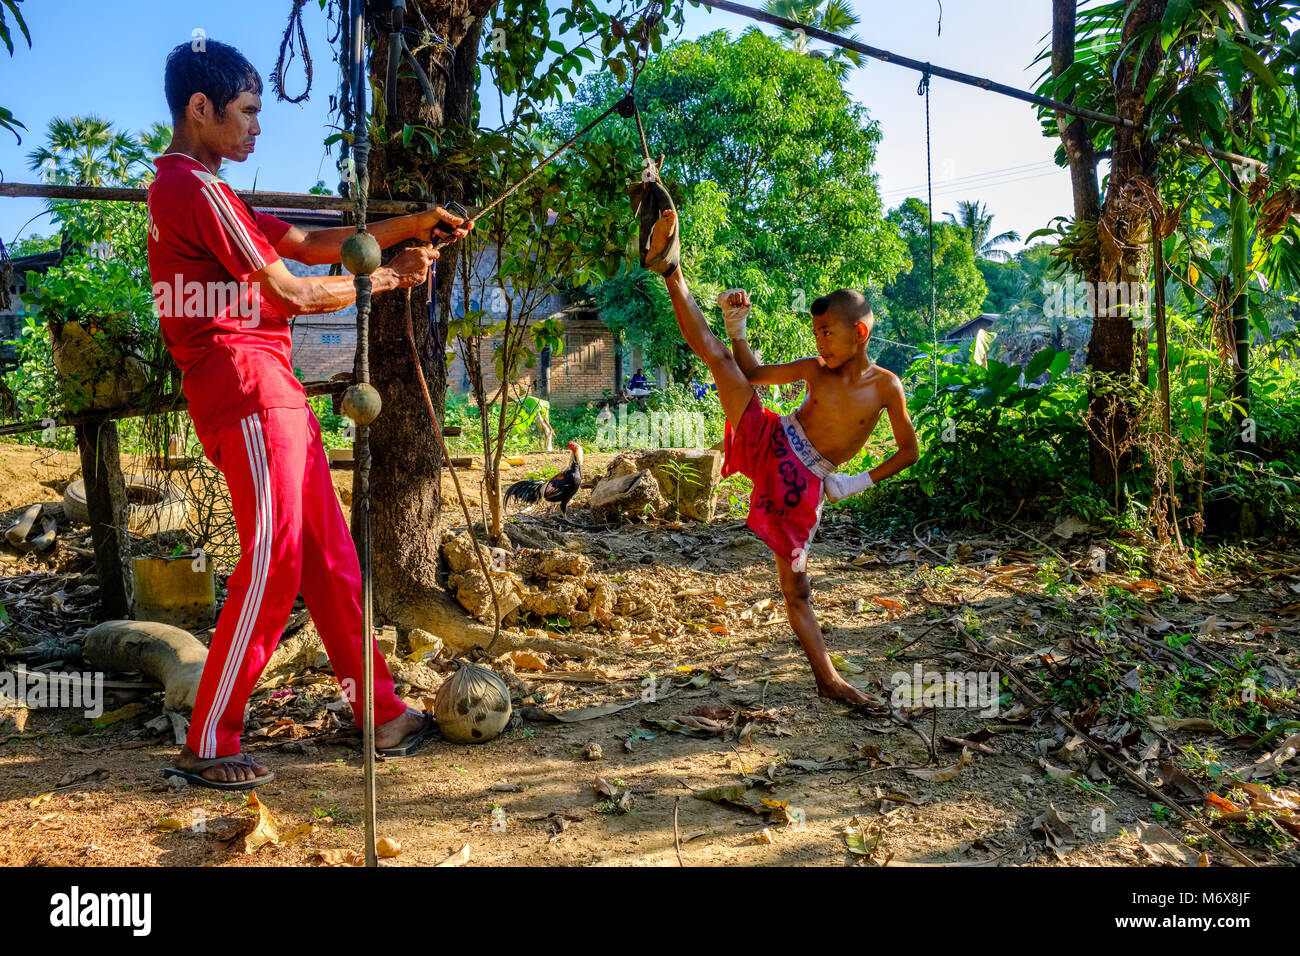 A seven years old boy is training his kickboxing skills, getting stretched by his trainer Stock Photo